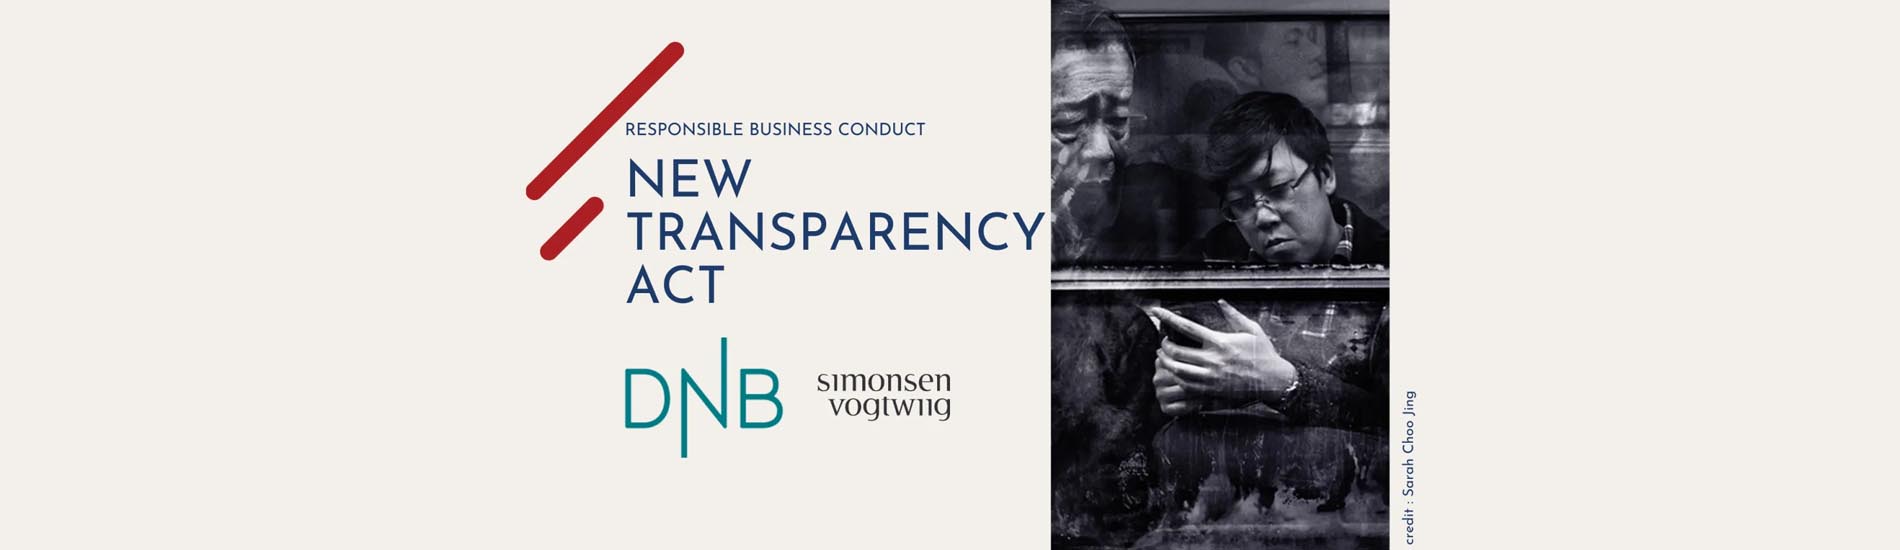 Responsible Business Conduct: Transparency Act